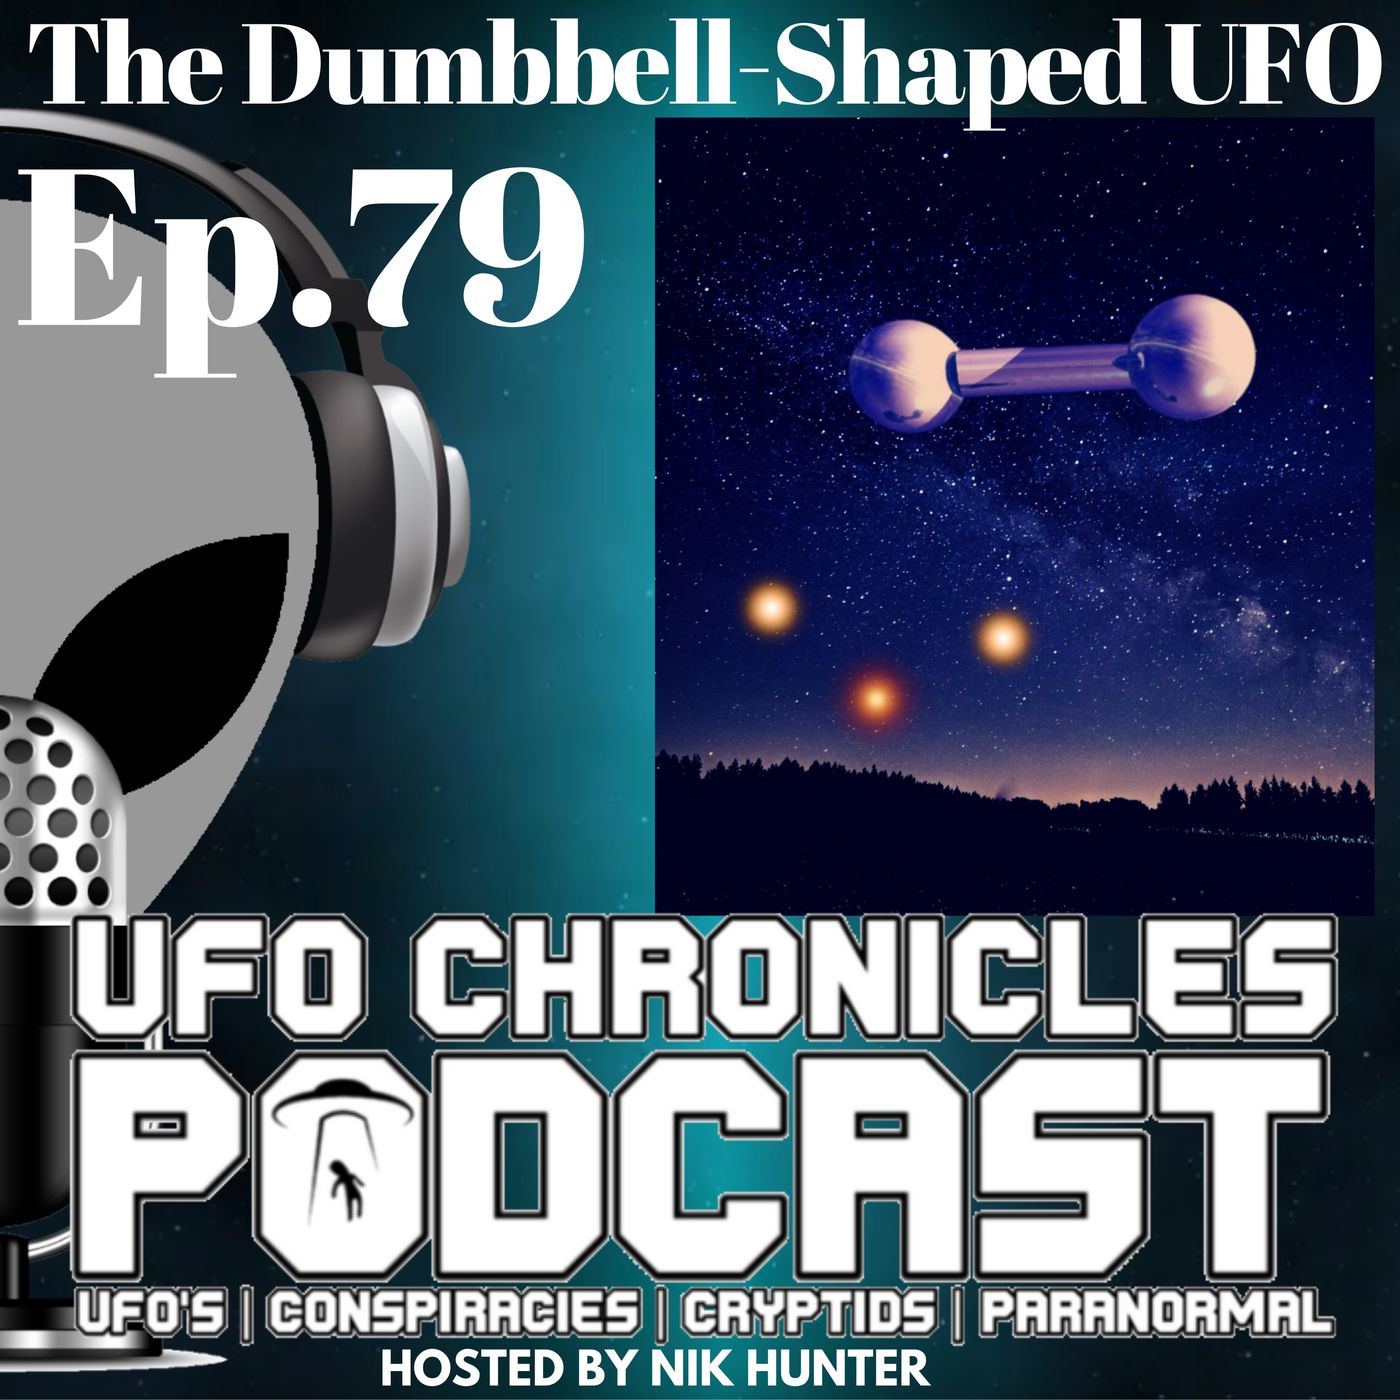 Ep.79 The Dumbbell-Shaped UFO from UFO Chronicles Podcast on Hark